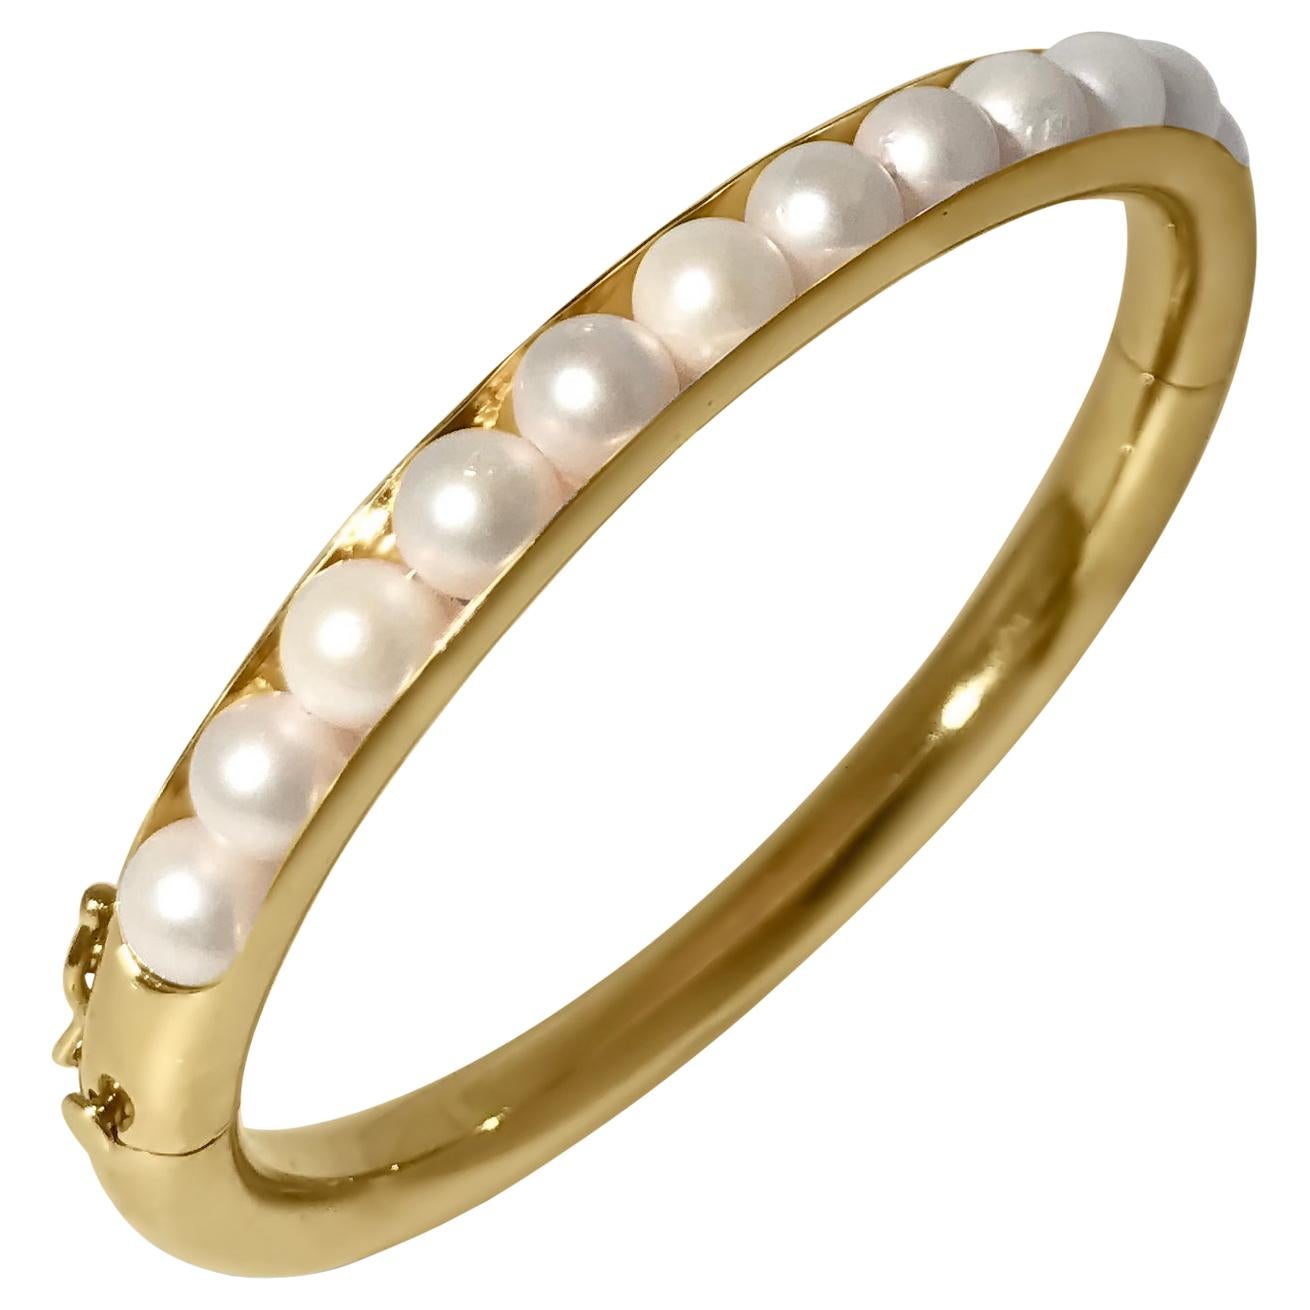 14 Karat Yellow Gold Oval Bangle Bracelet with T-Pearls by Manart For Sale